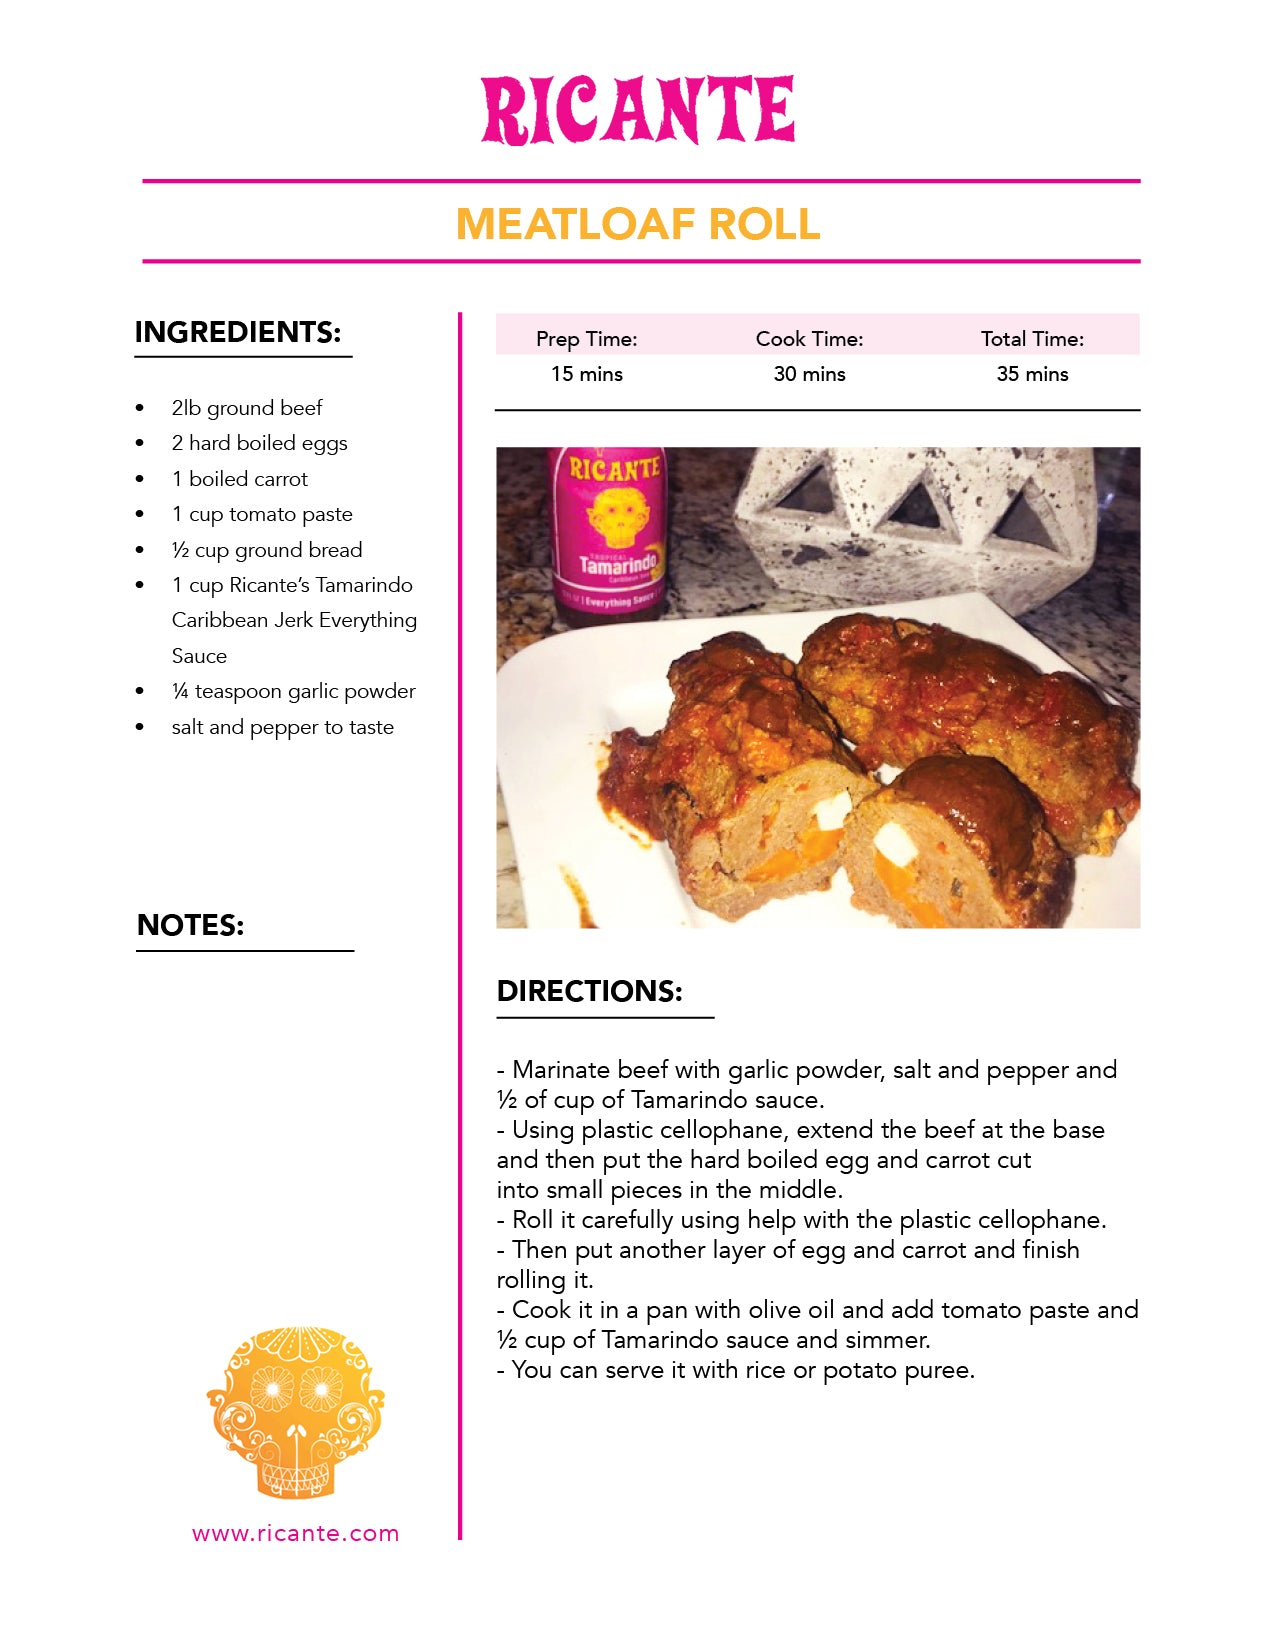 Ricante's Meatloaf